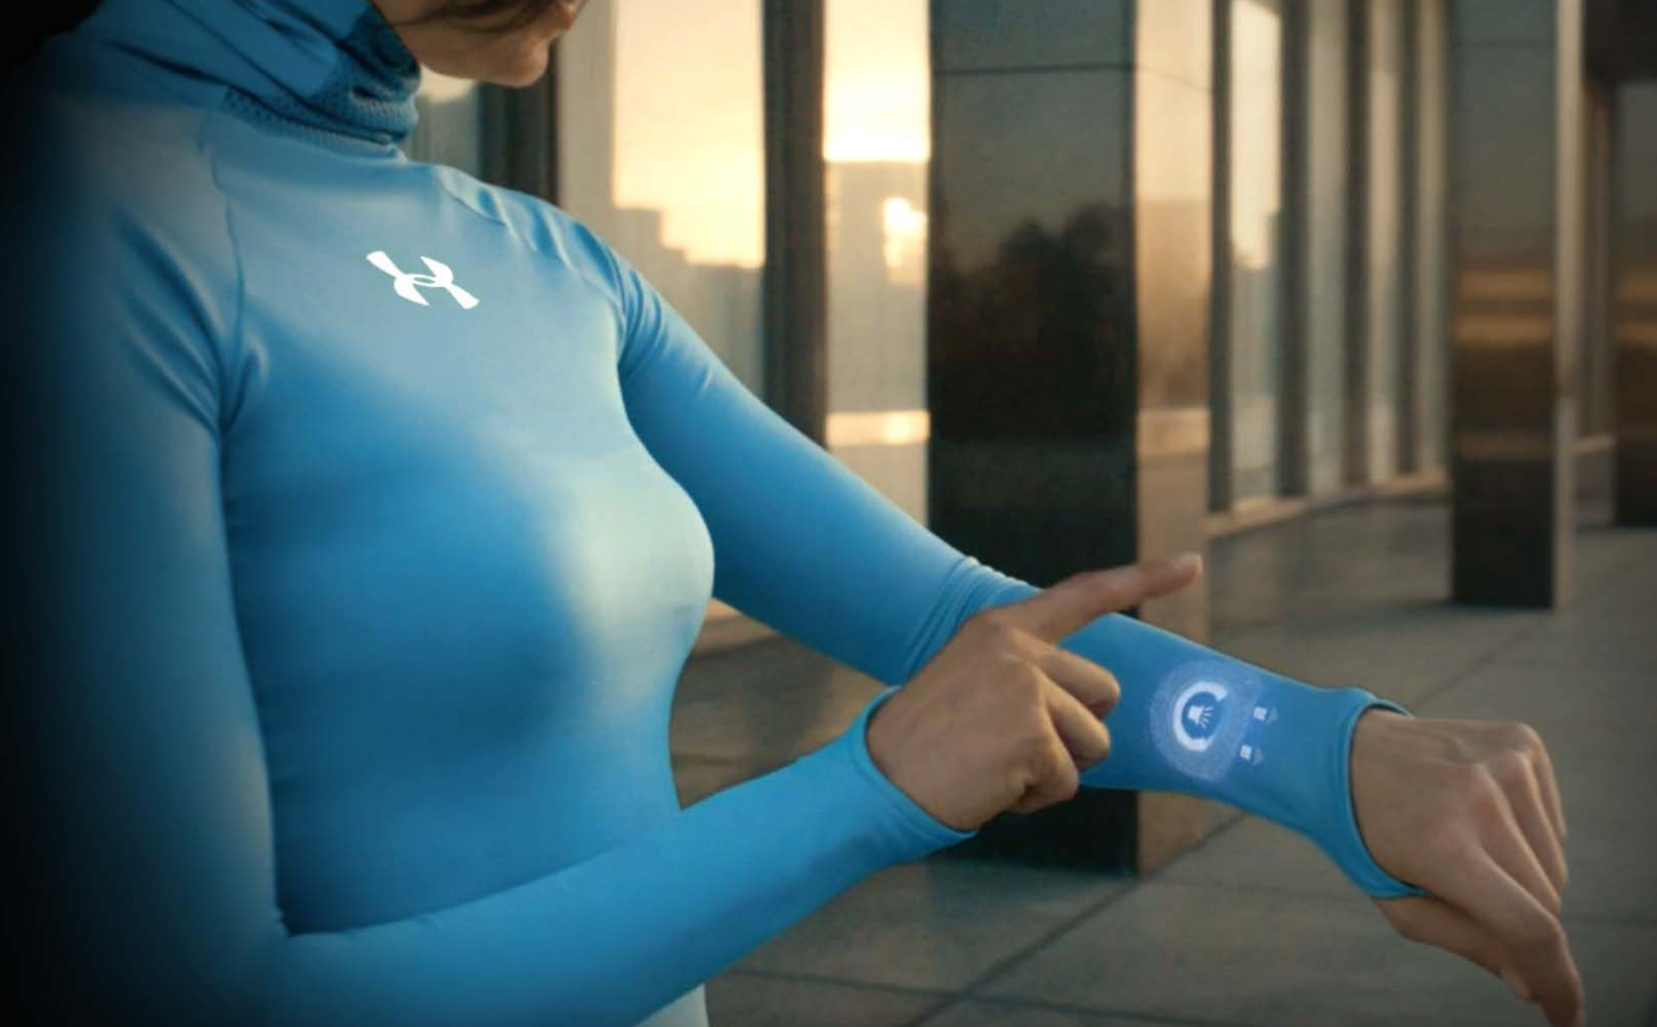 The smart clothes of the future – Enkey 